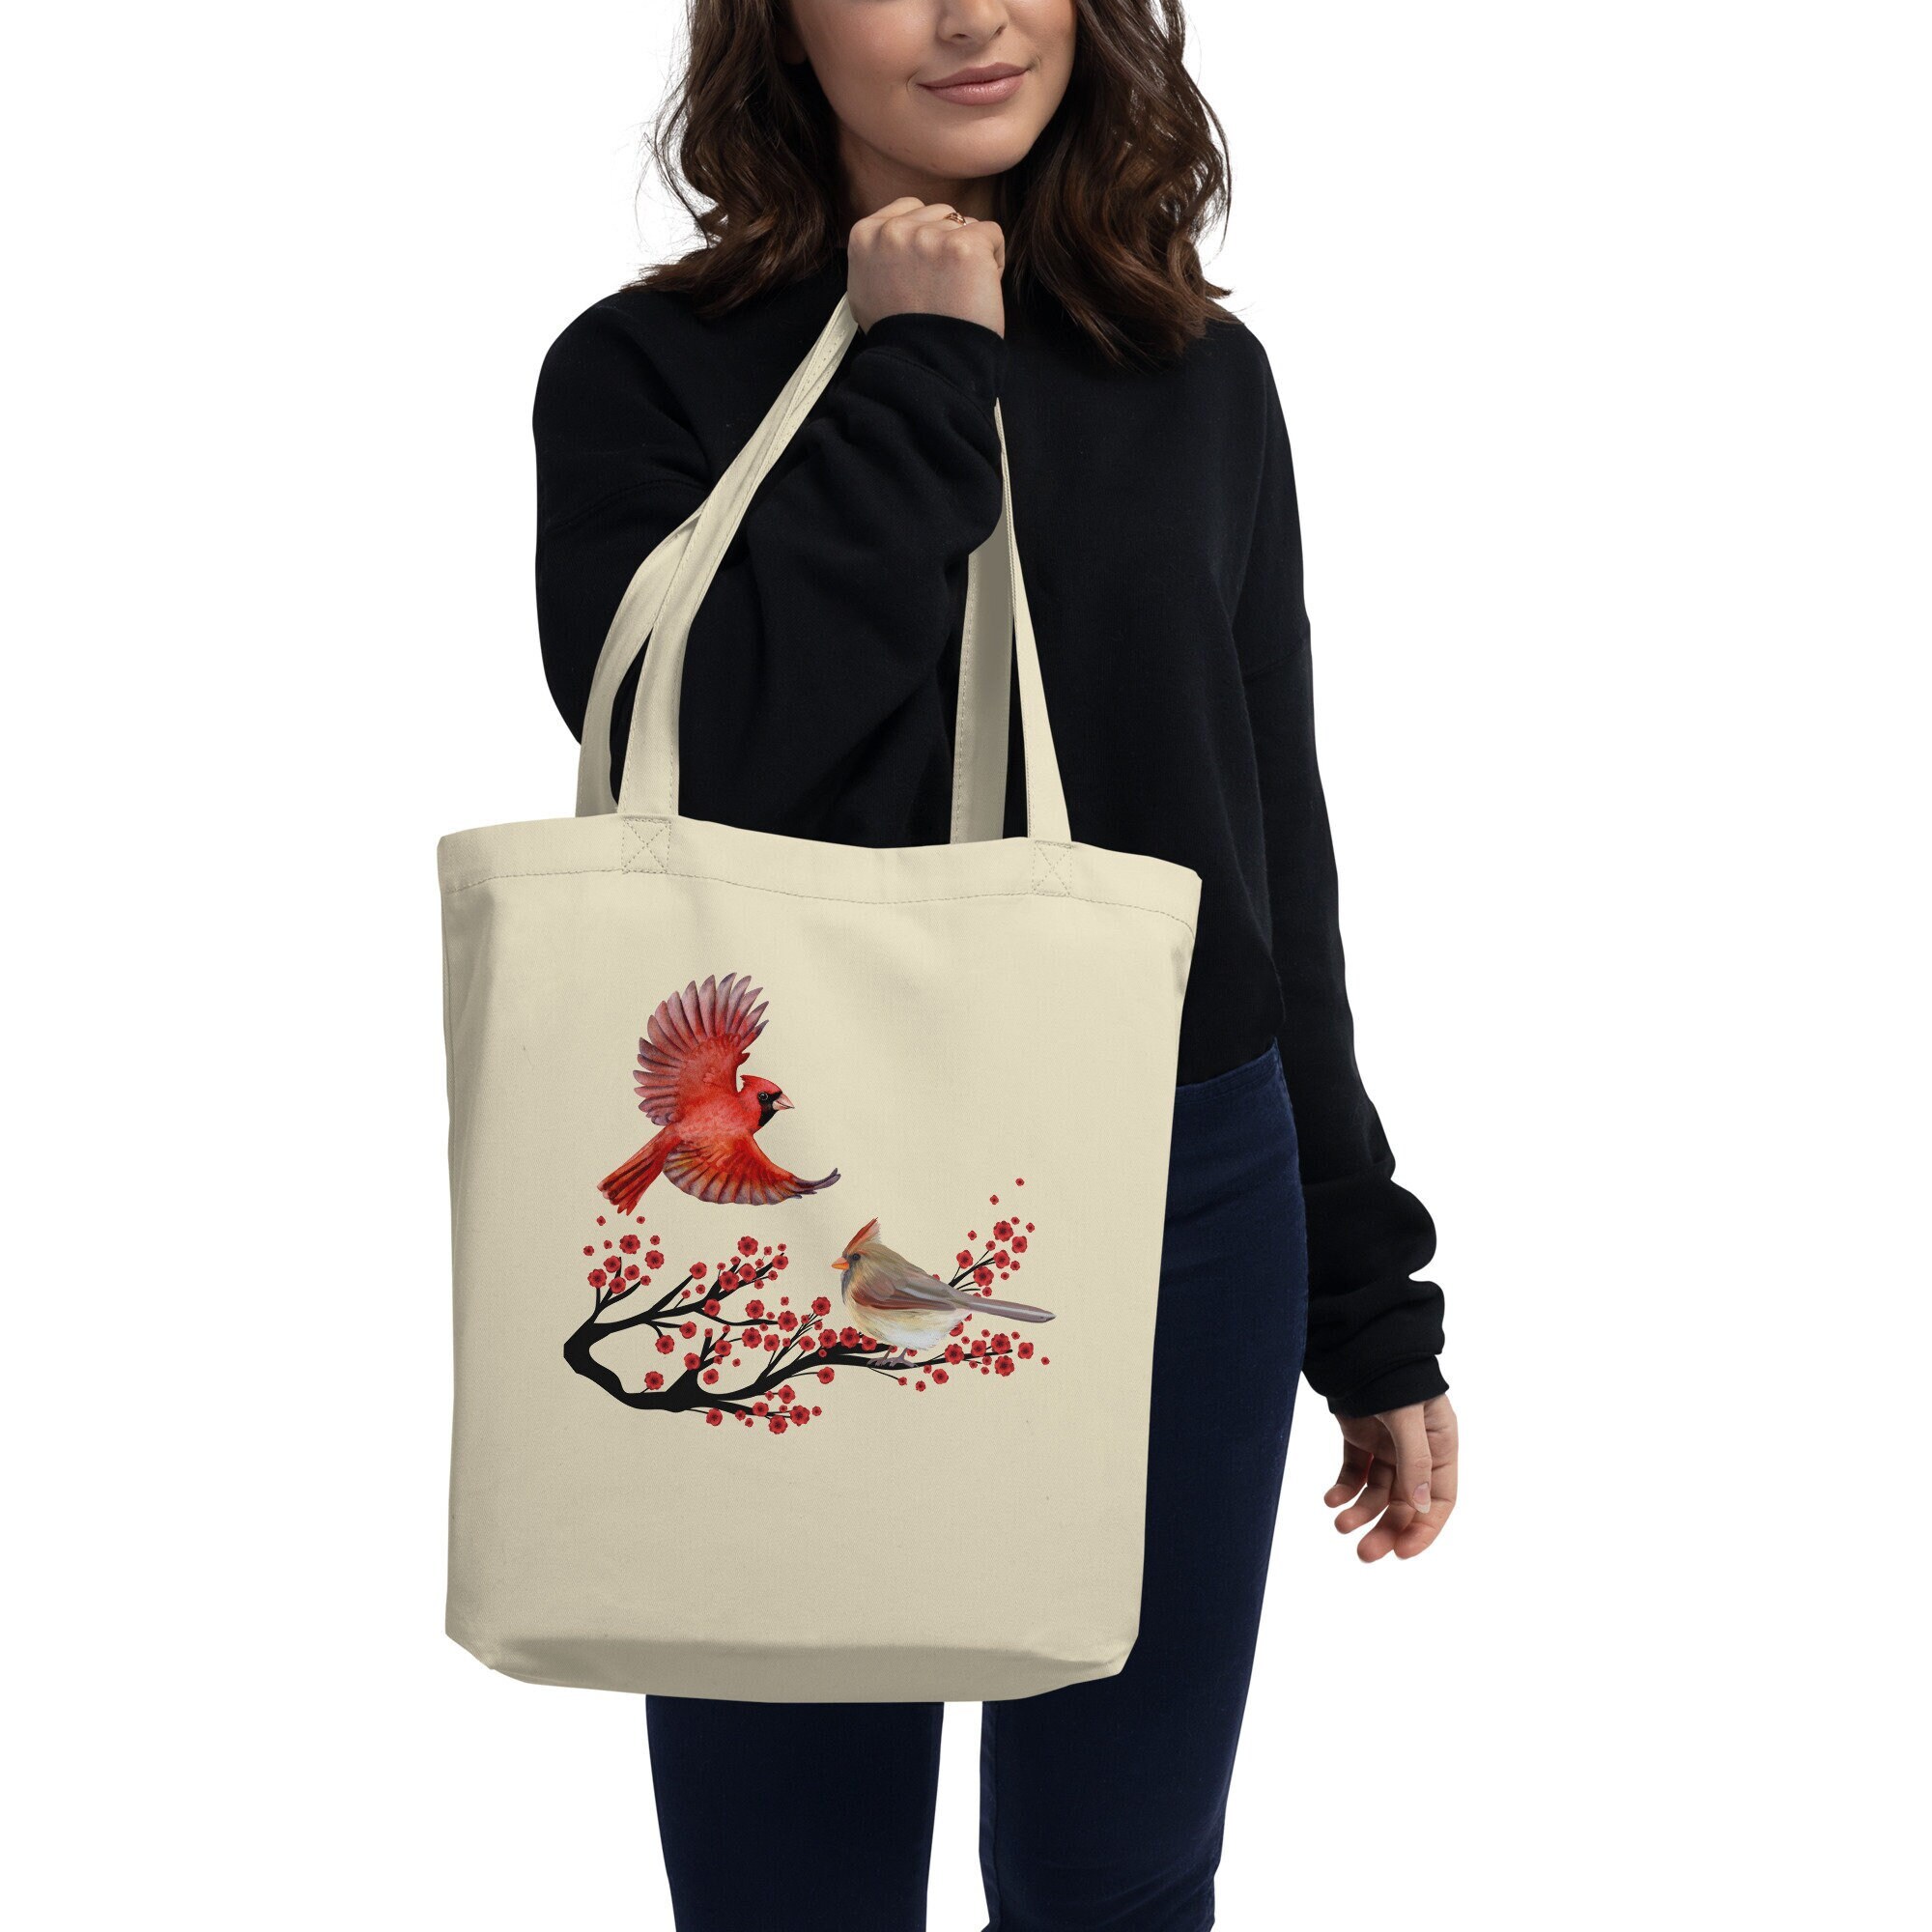 Christmas Cardinal Bird Canvas Tote Bag Winter Snowflake Animal Holly Berry Reusable Grocery Bags Shopping Handbag Women Girls Casual Shoulder Bags Storage Organizer for Gym Travel Chic Style 